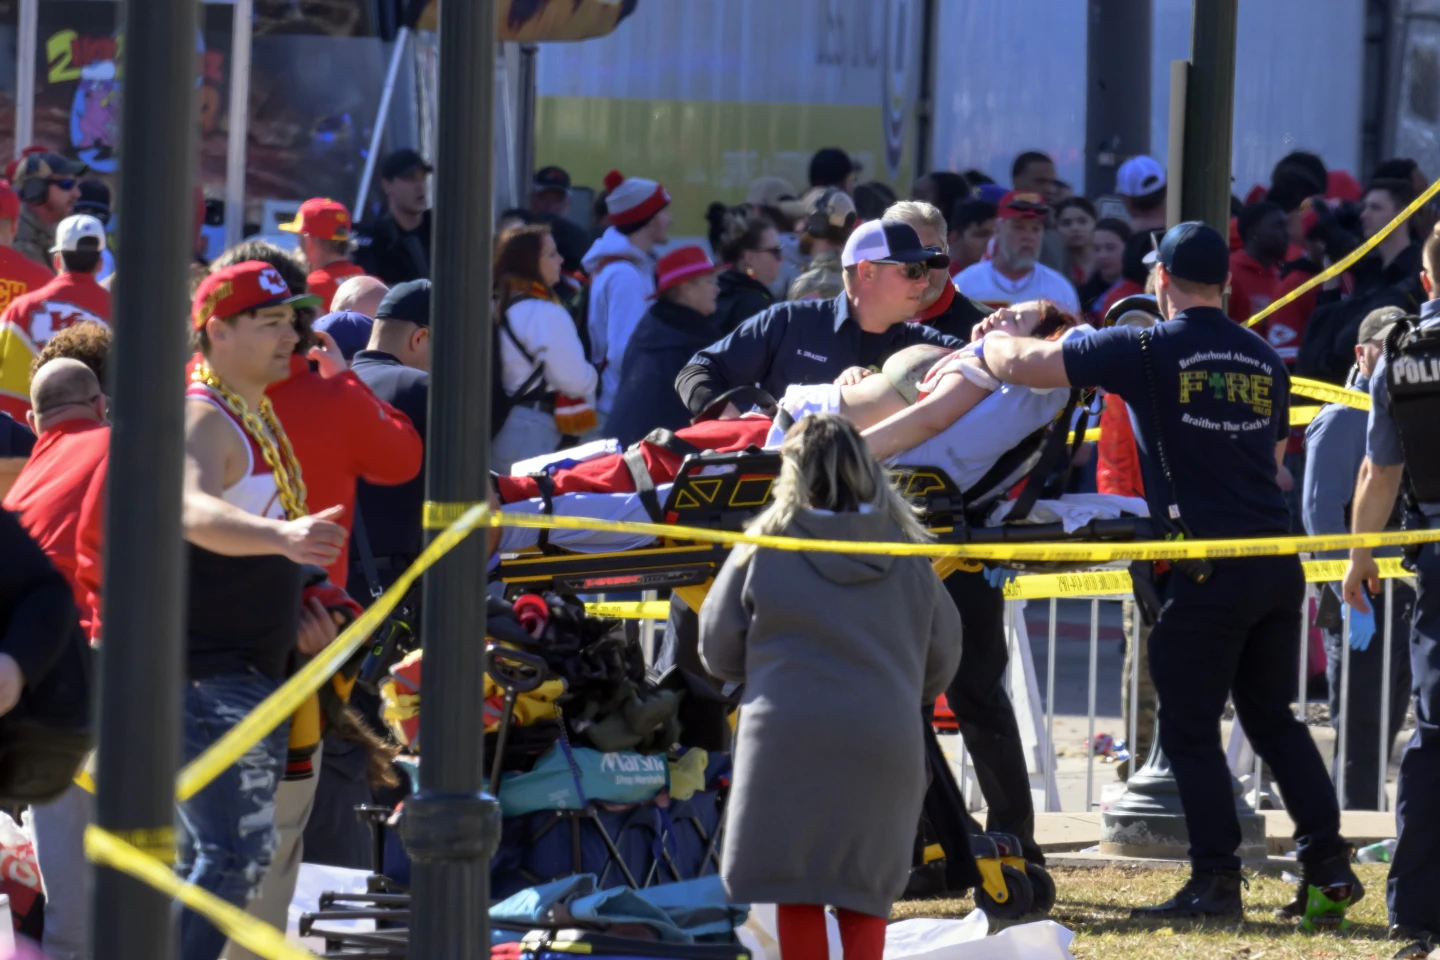 Shooting at Chiefs’ Super Bowl parade kills 1, wounds 21 others, including children